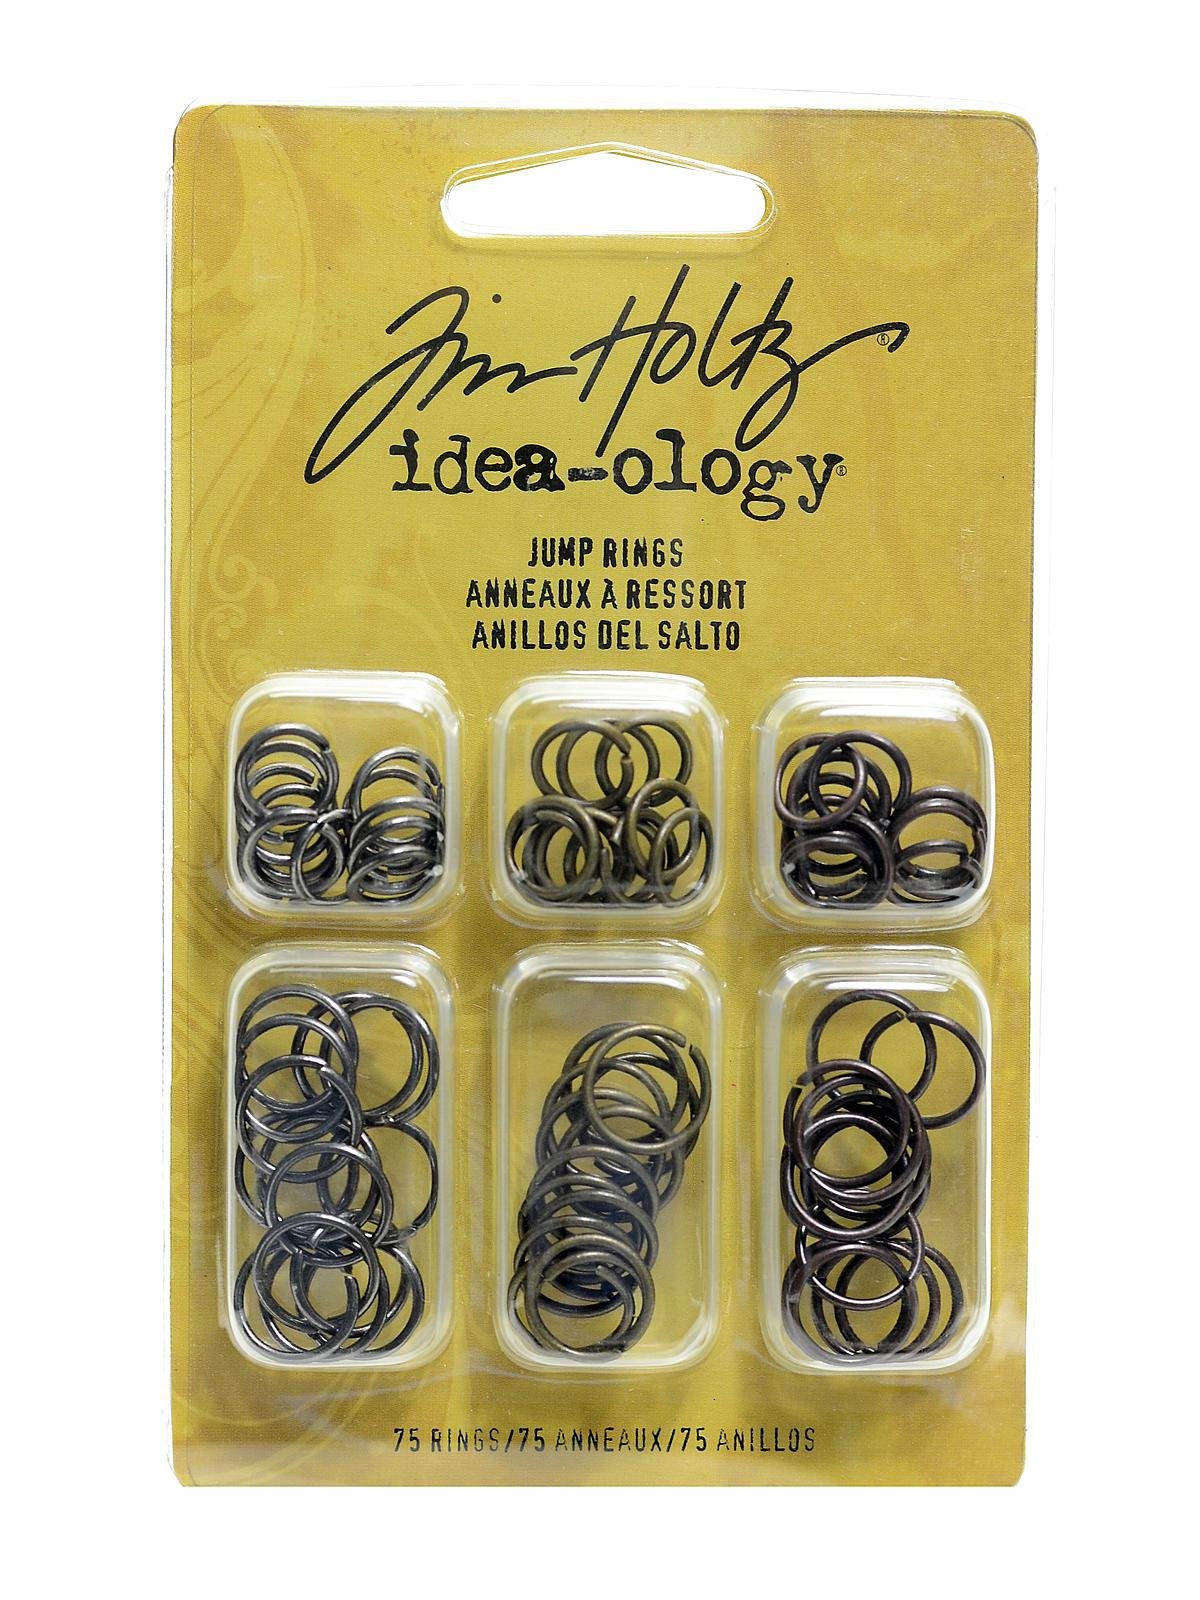 Tim Holtz Idea-ology 75 JUMP RINGS Hardware Attach Ring TH92726 